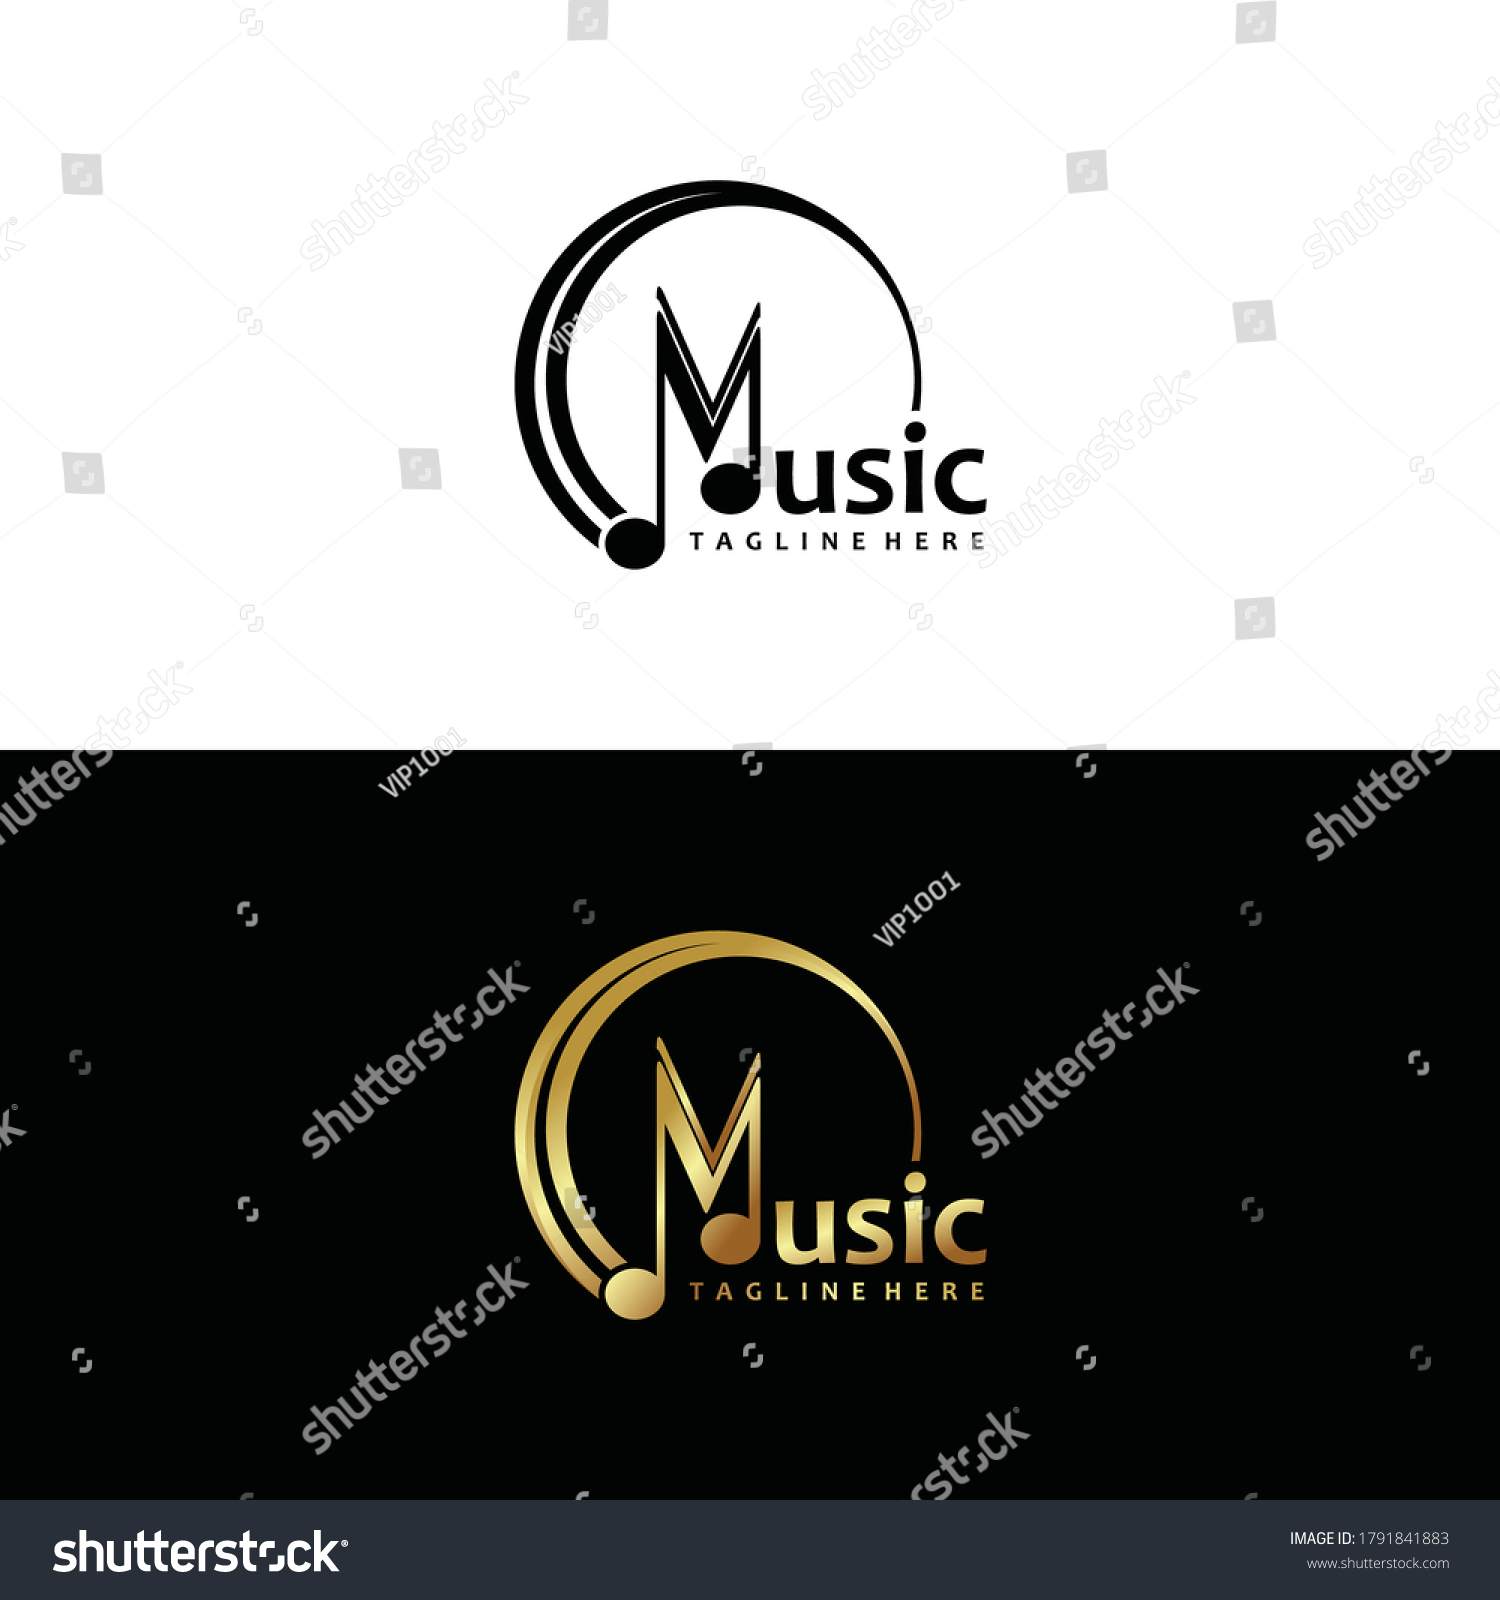 Melody logo Images, Stock Photos & Vectors | Shutterstock